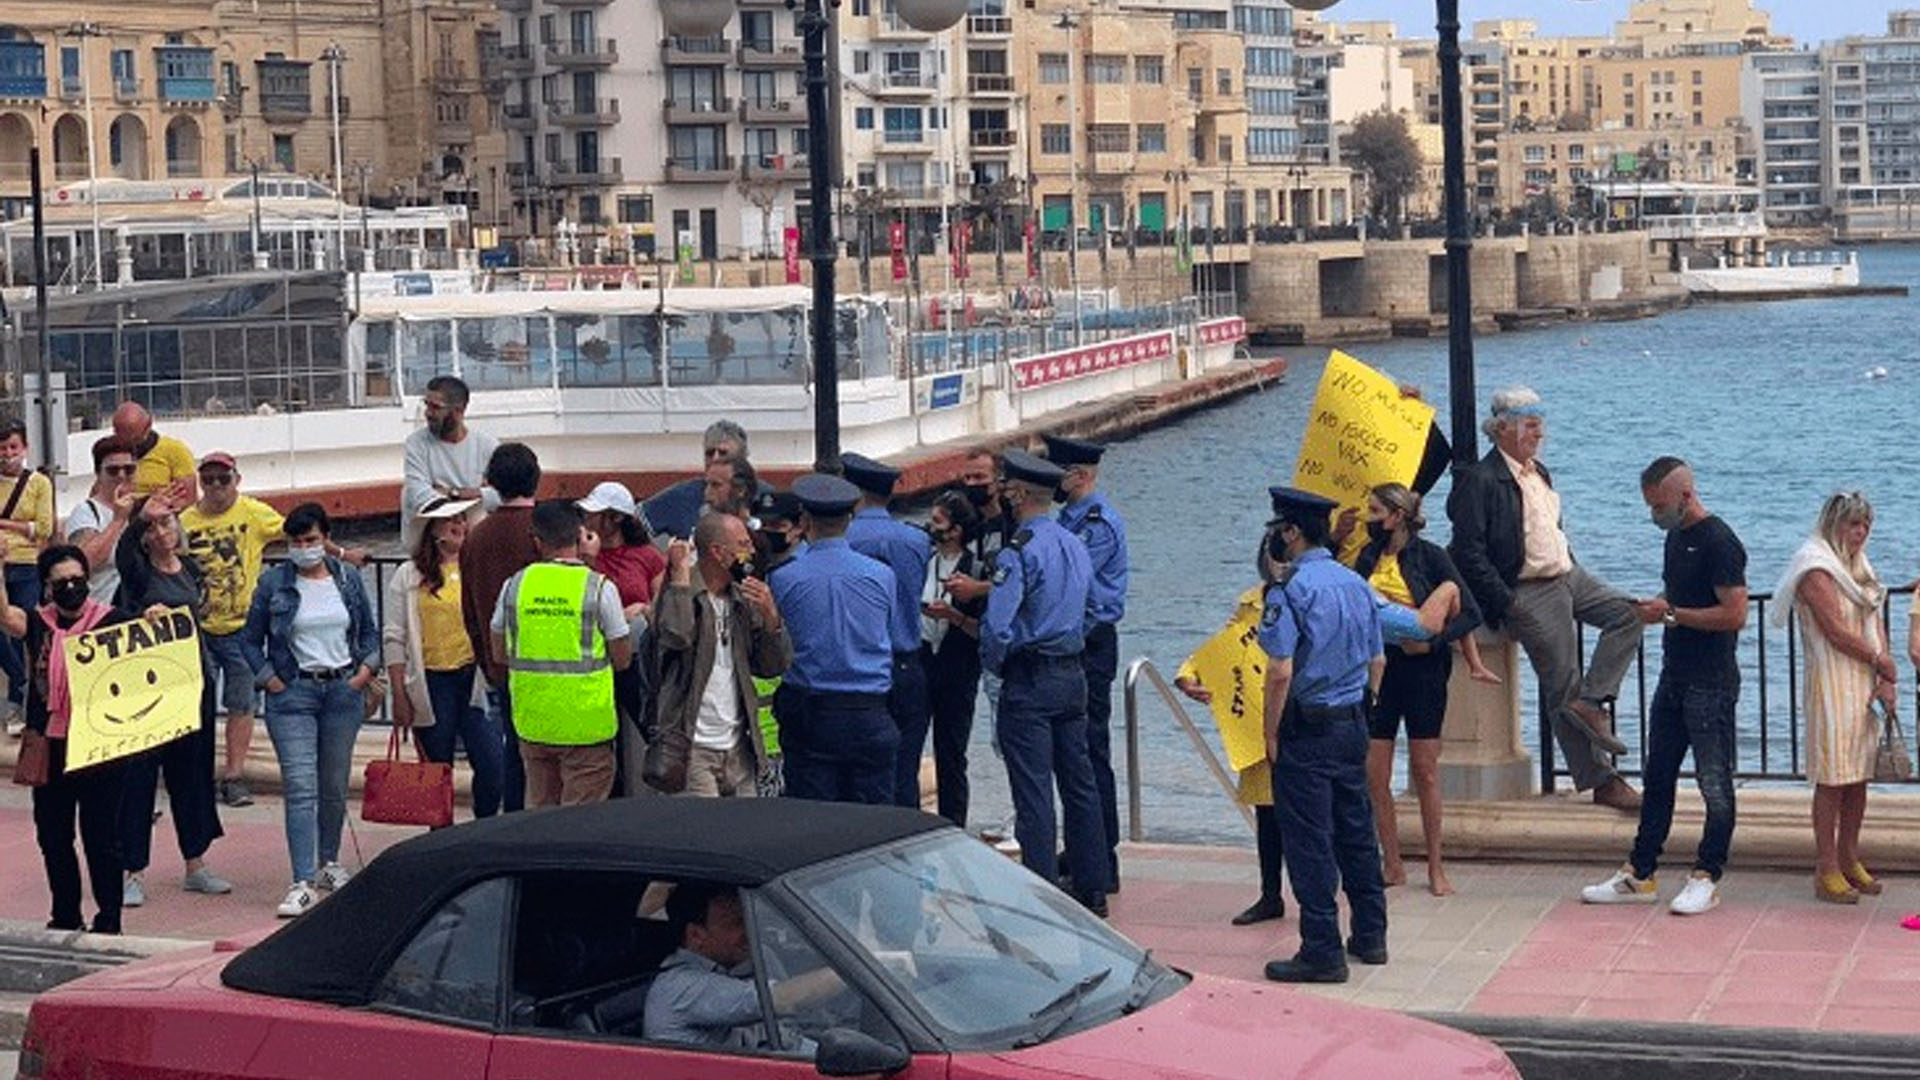 Protest in Sliema against mask wearing